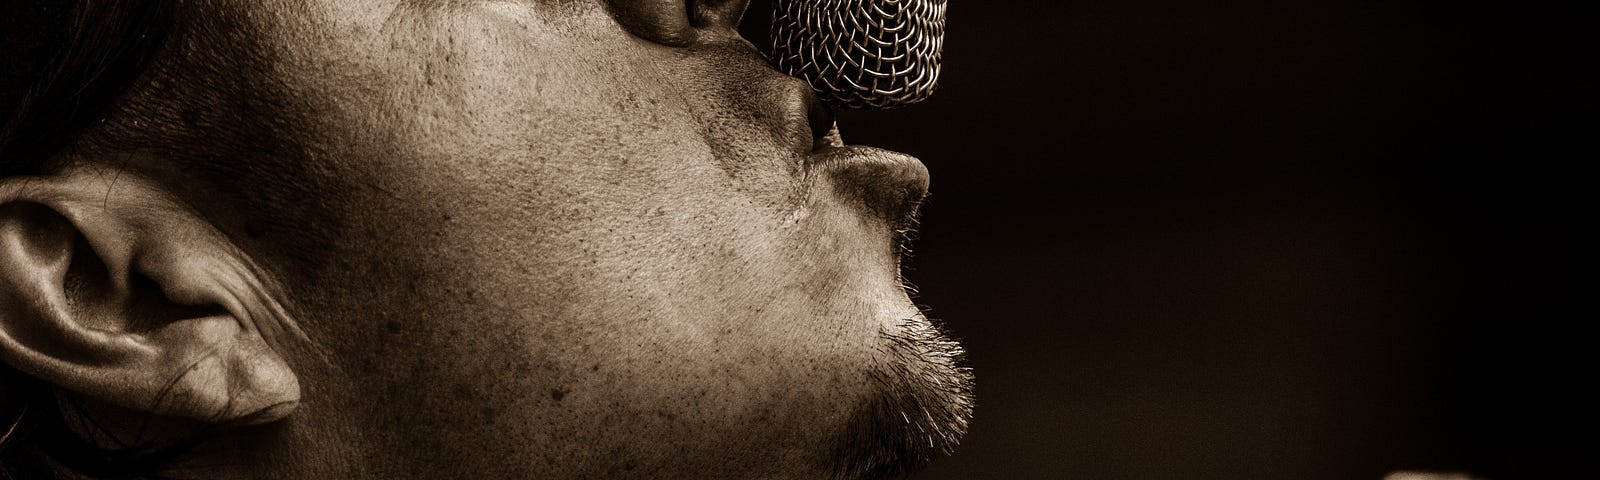 A close up shot of a musician singing into a microphone